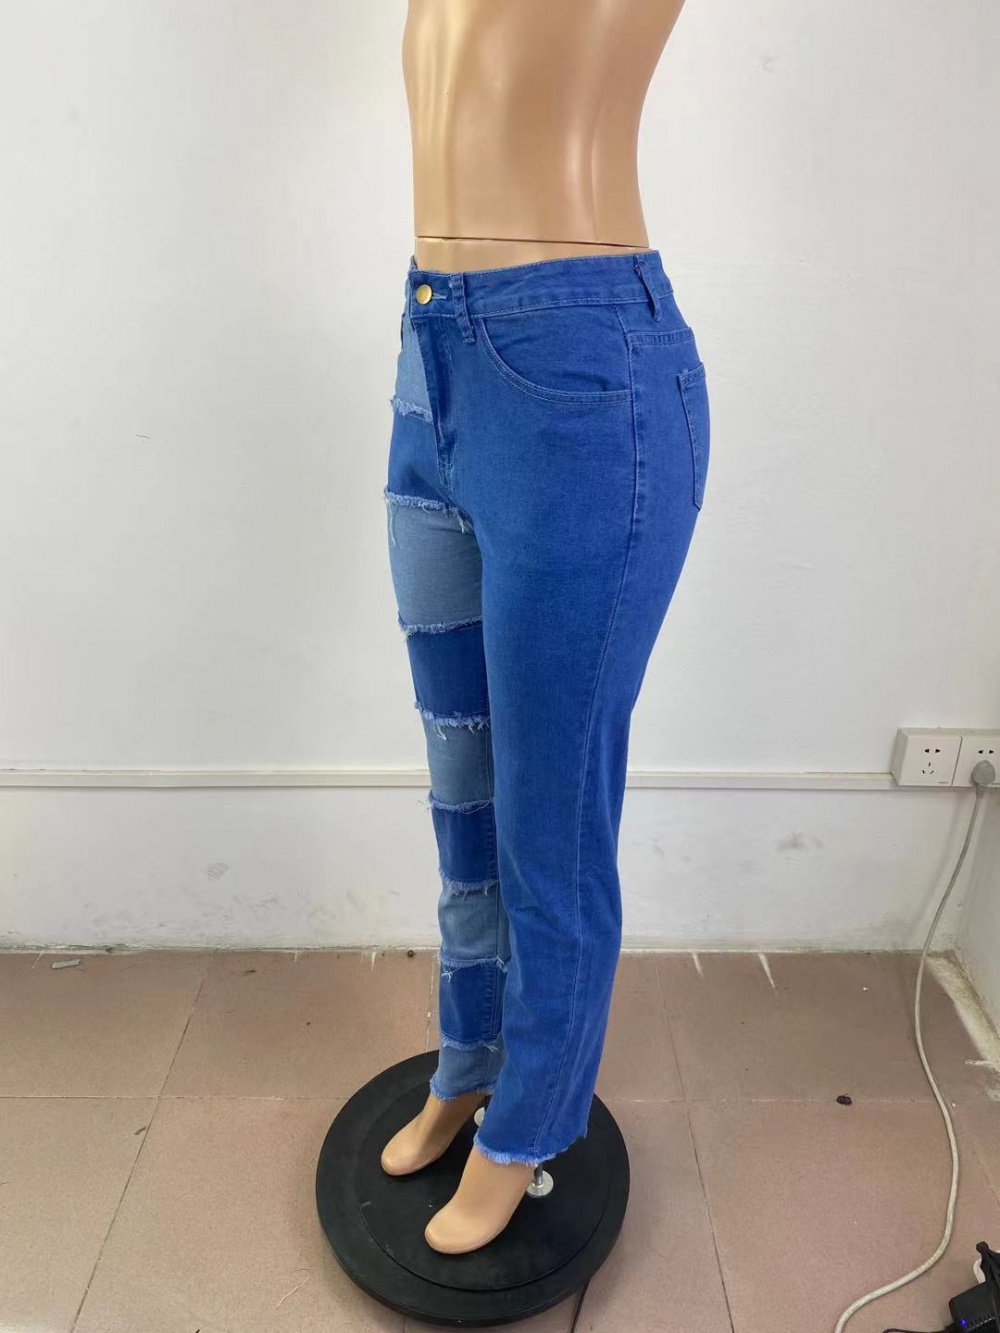 European style straight stitching jeans for women